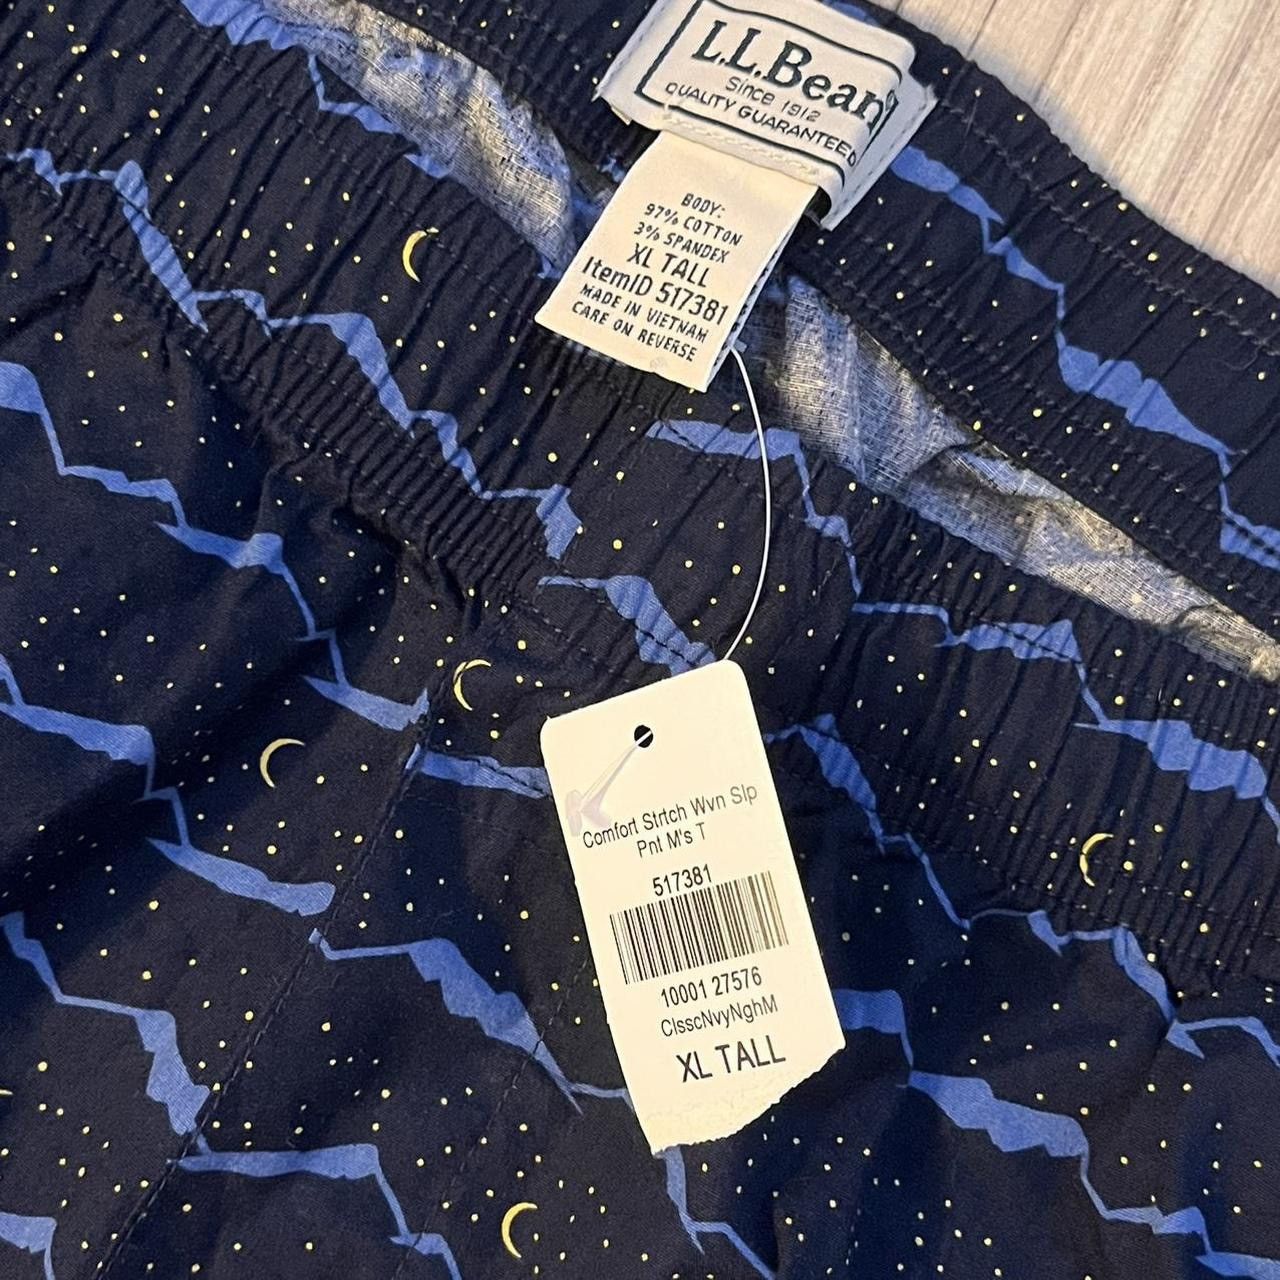 Vintage NWT L.L.Bean Mens Comfort Stretch Pajama Pants Moon and Star Size US 32 / EU 48 - 3 Preview